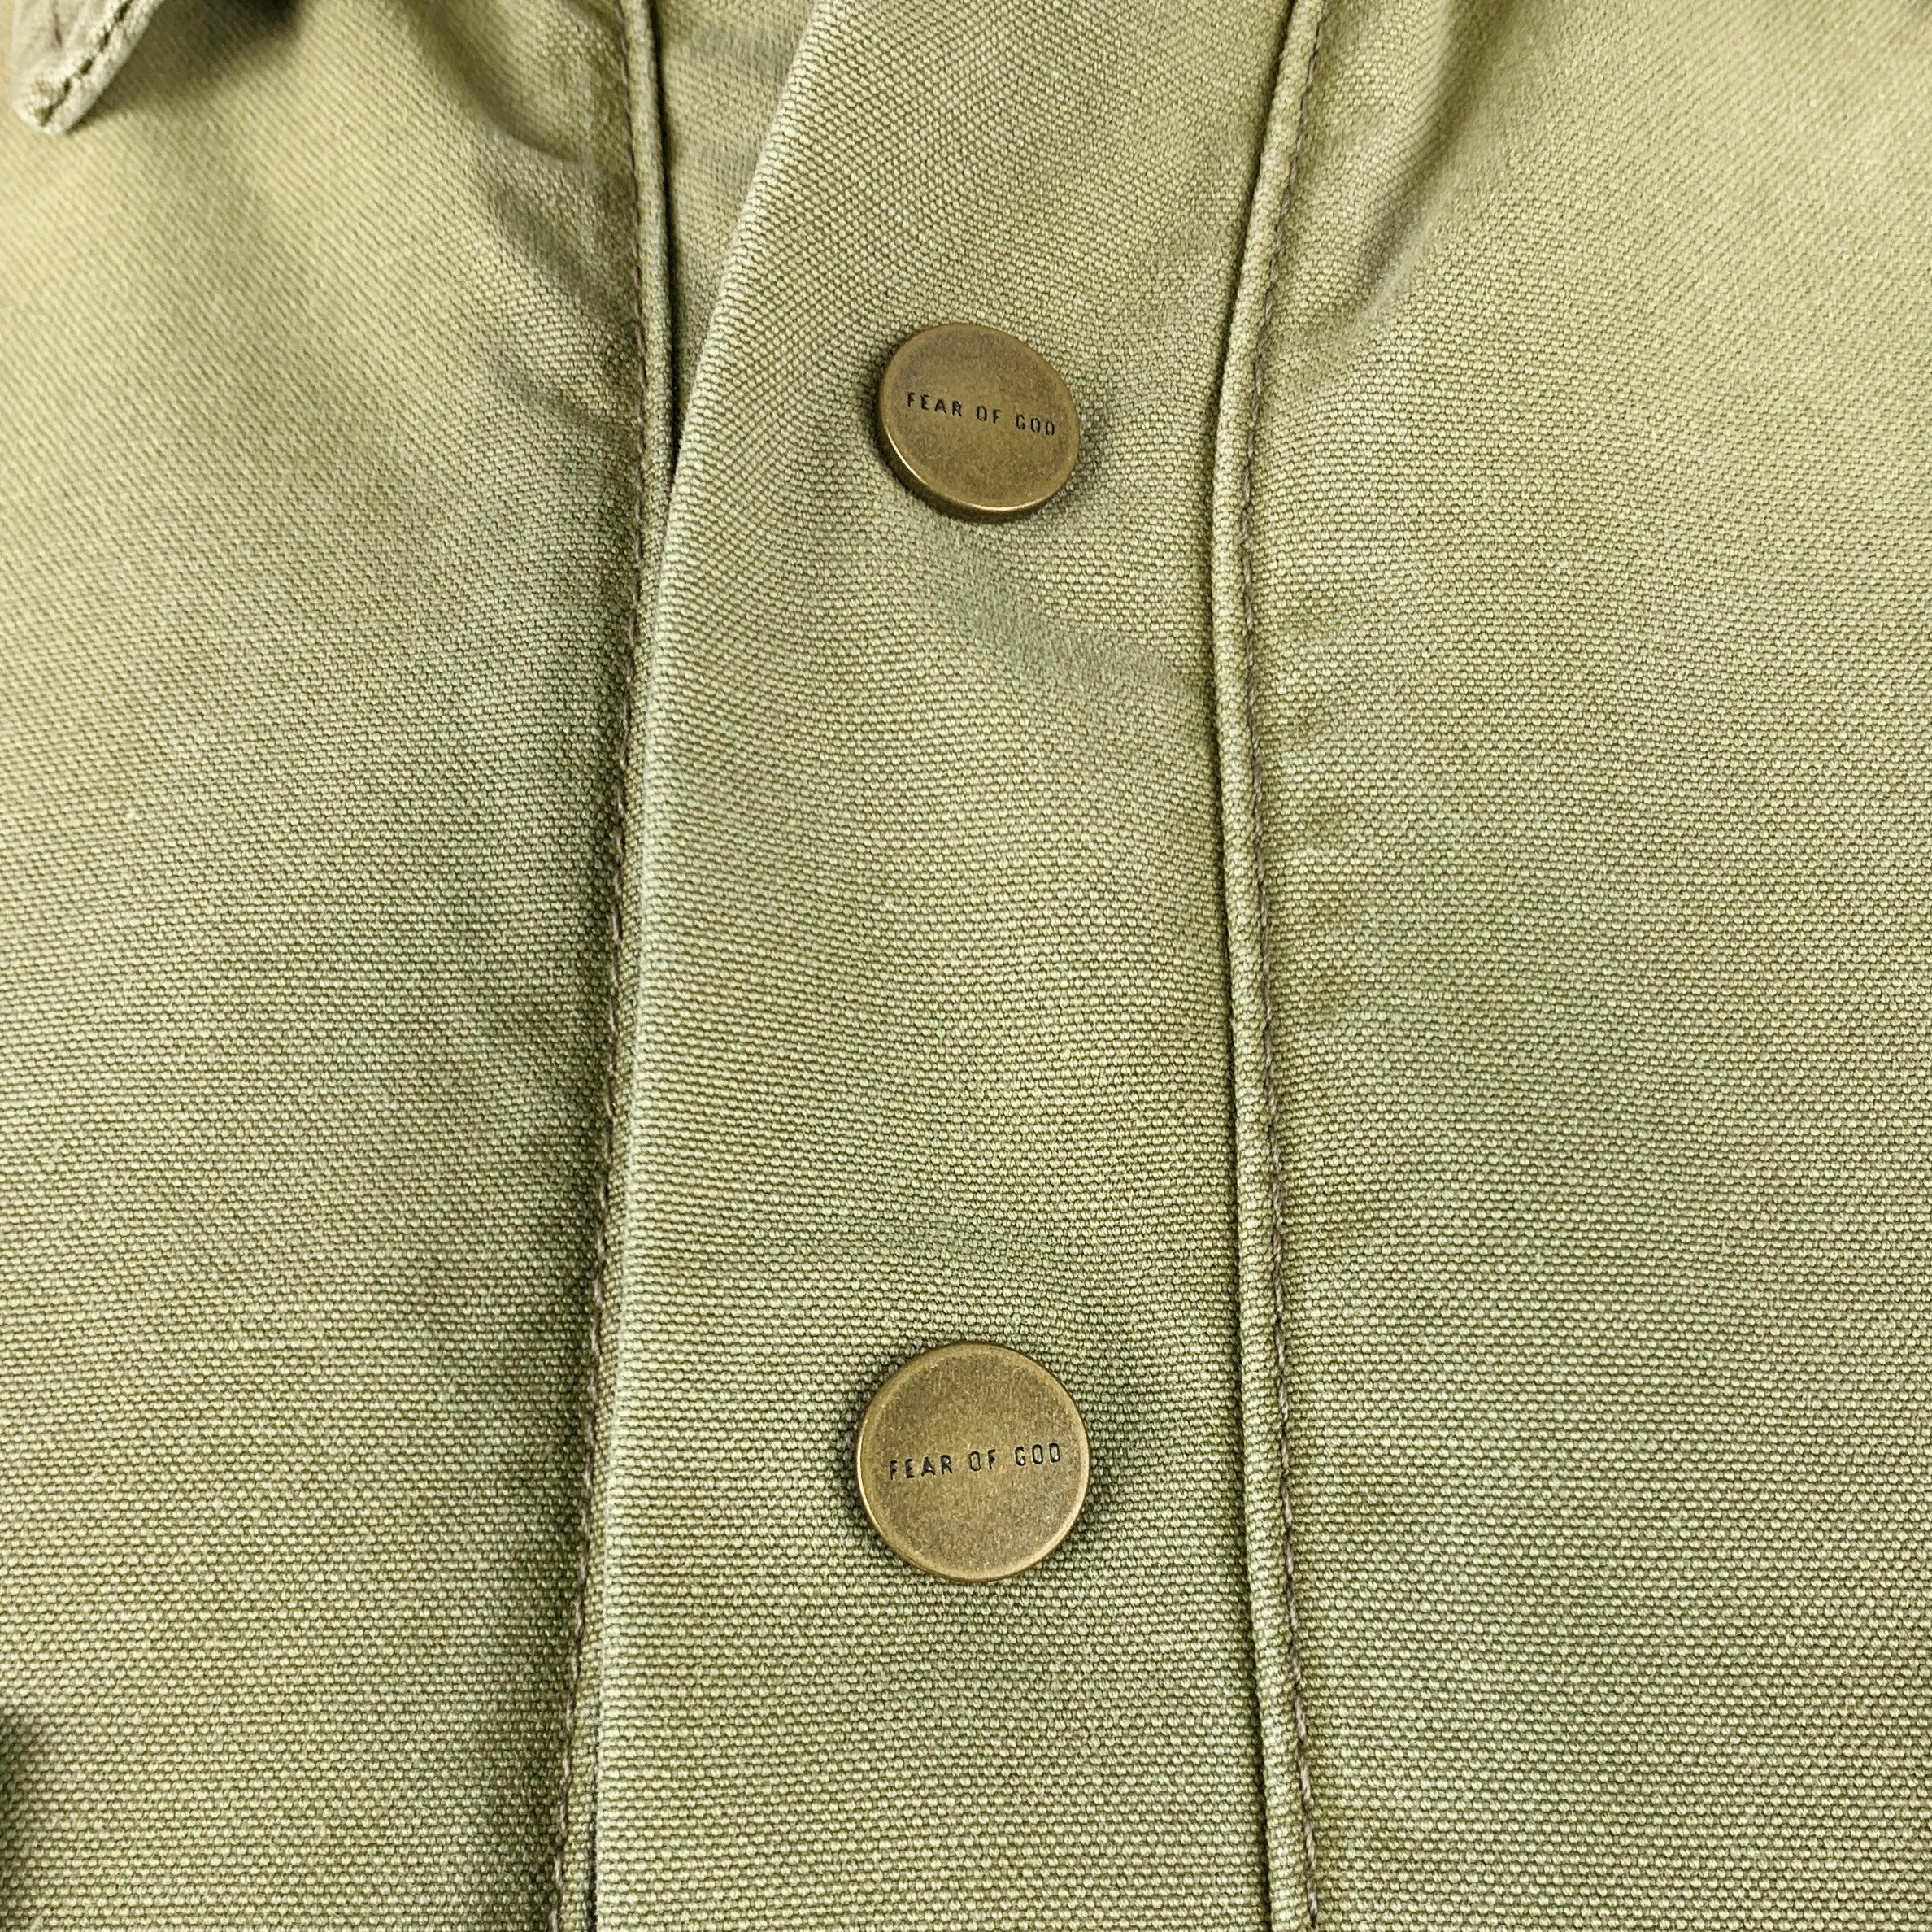 FEAR OF GOD jacket
in a
khaki cotton fabric featuring two large pockets, spread collar, and half placket snap closure. Made in USA.Very Good Pre-Owned Condition. Moderate marks. 

Marked:   L 

Measurements: 
 
Shoulder: 22 inches Chest: 56 inches